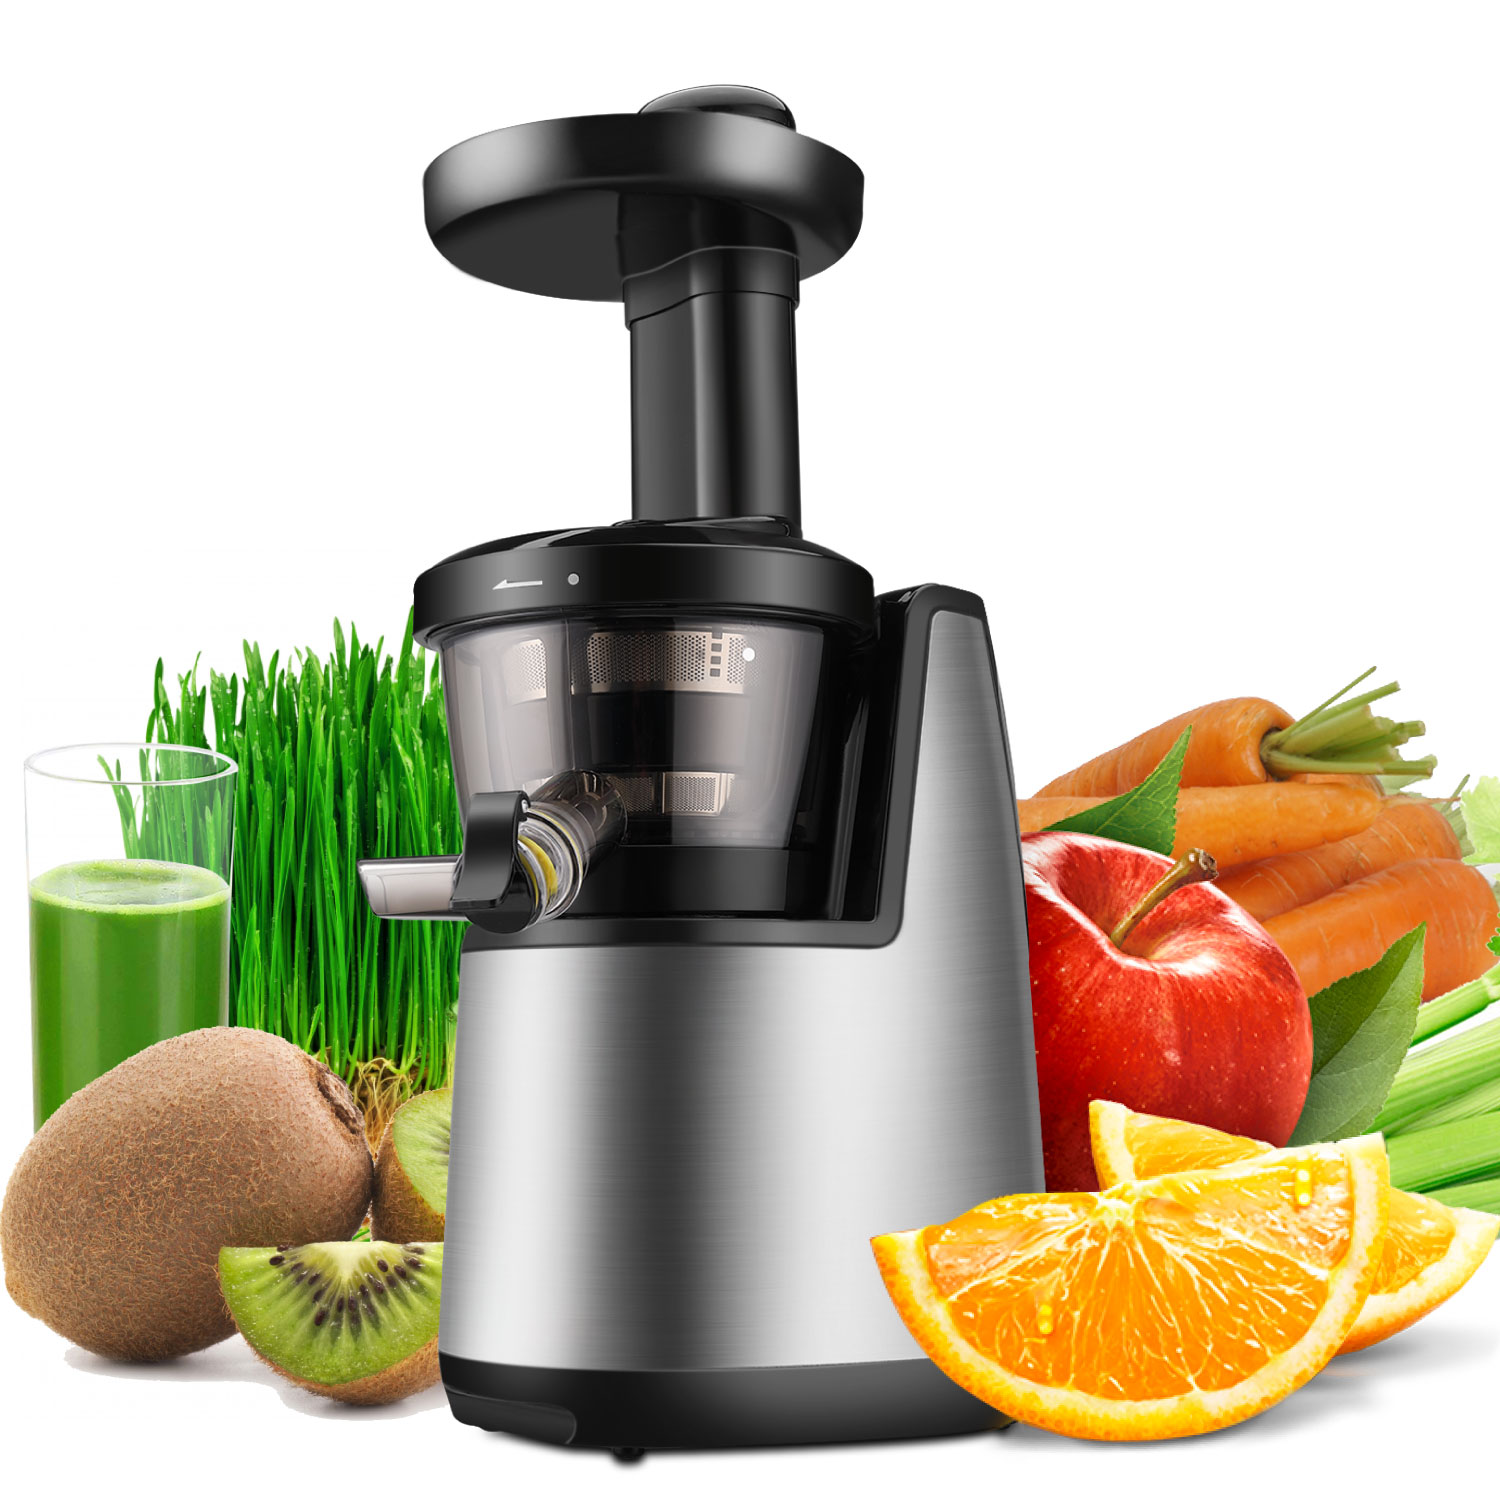 Cold Press Juicer Machine -  Masticating Juicer Slow Juice Extractor Maker Electric Juicing Vertical Stand for Fruit, Vegetable, Greens, Wheat Grass & More with Big Cup & Juicing Bowl